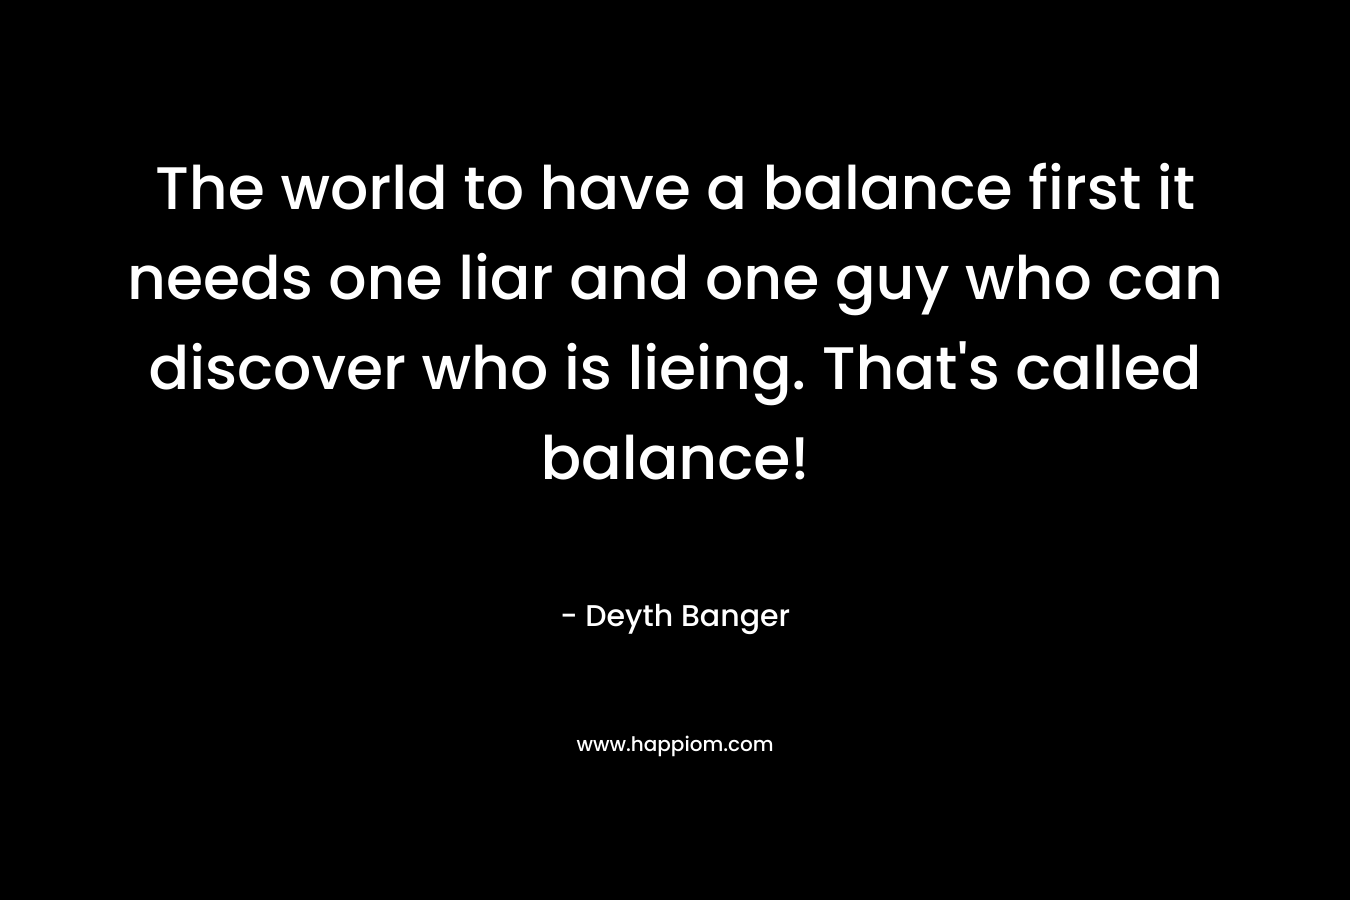 The world to have a balance first it needs one liar and one guy who can discover who is lieing. That's called balance!